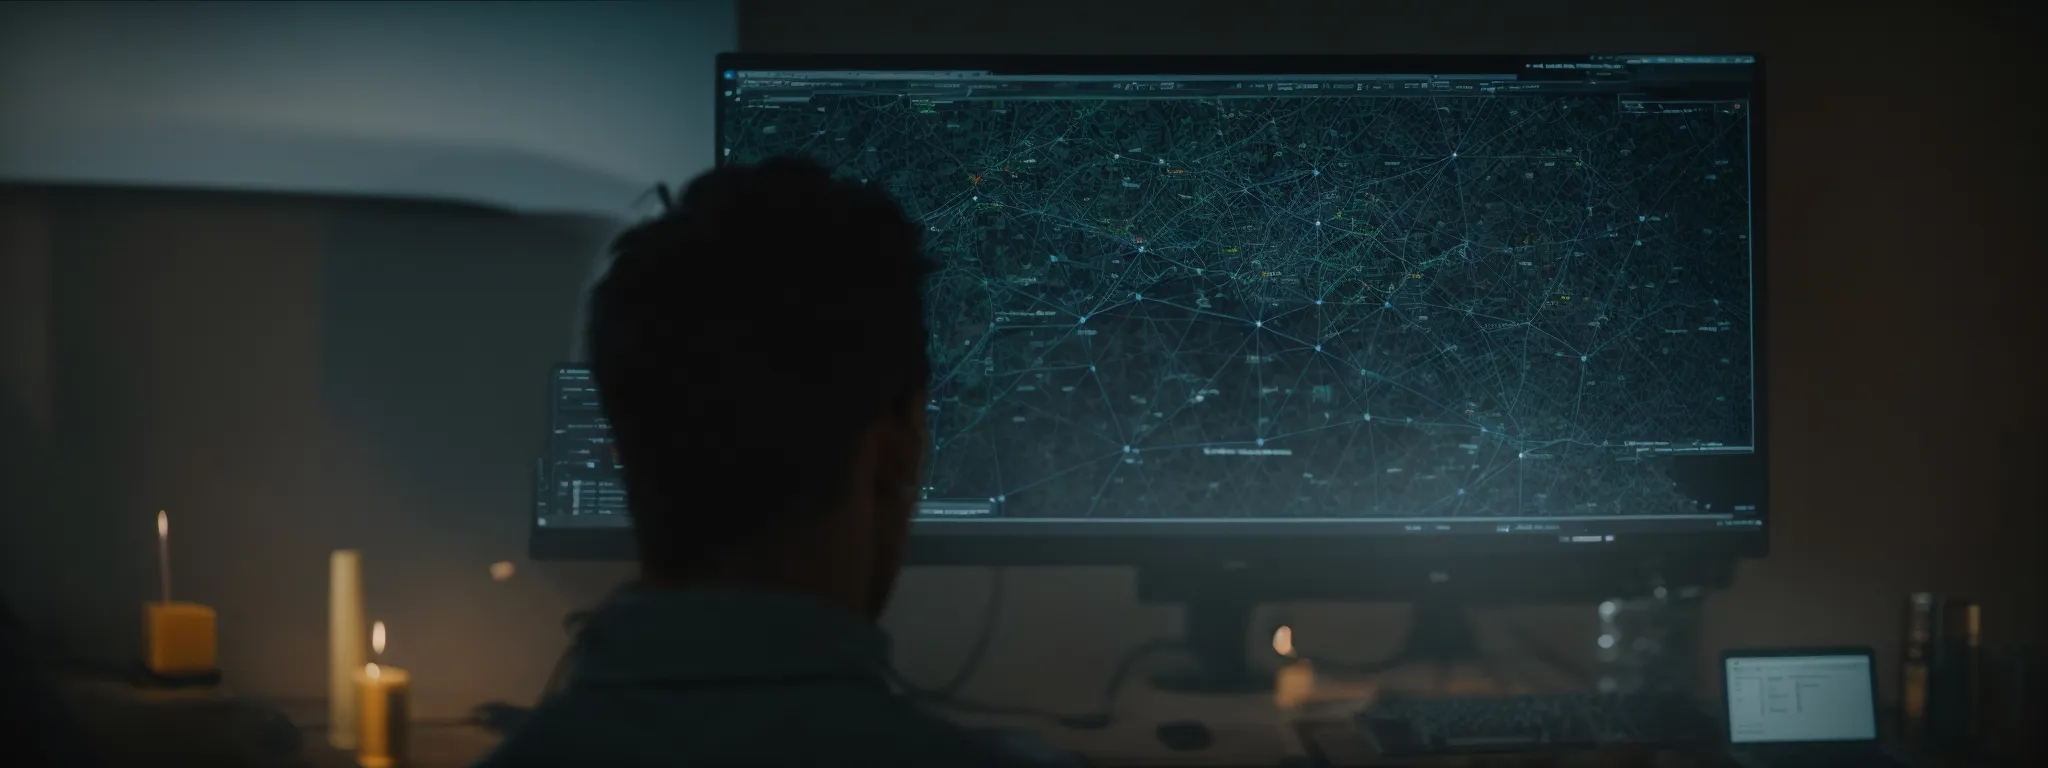 a digital marketing specialist intently observes a computer screen displaying a network map of interconnected web links.